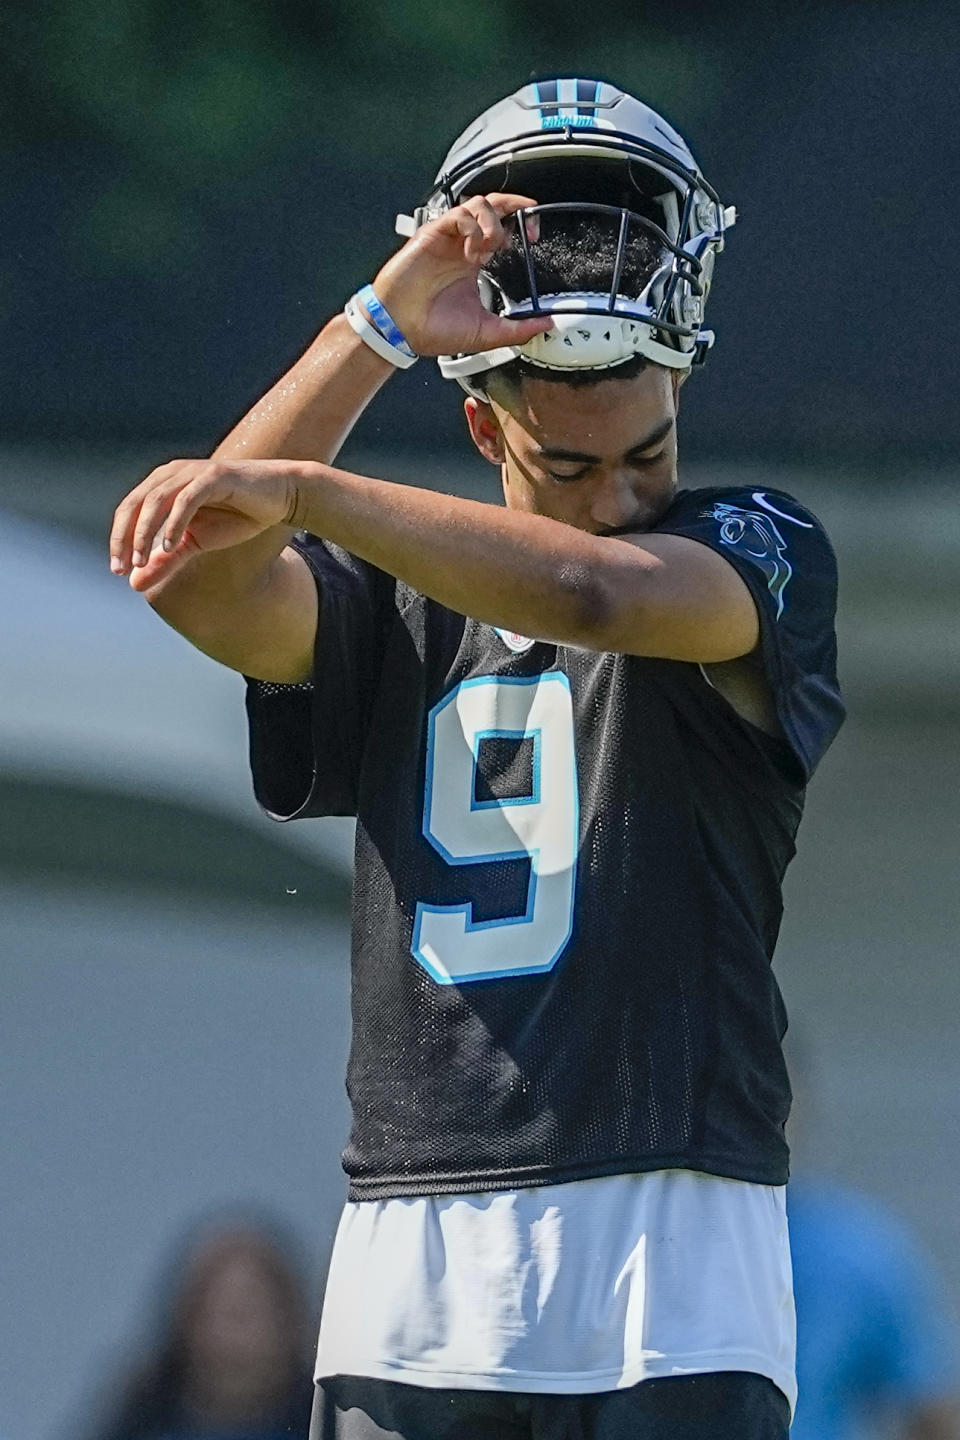 Carolina Panthers quarterback Bryce Young wipes his face during drills at the NFL football team's training camp on Wednesday, July 26, 2023, in Spartanburg, S.C. (AP Photo/Chris Carlson)